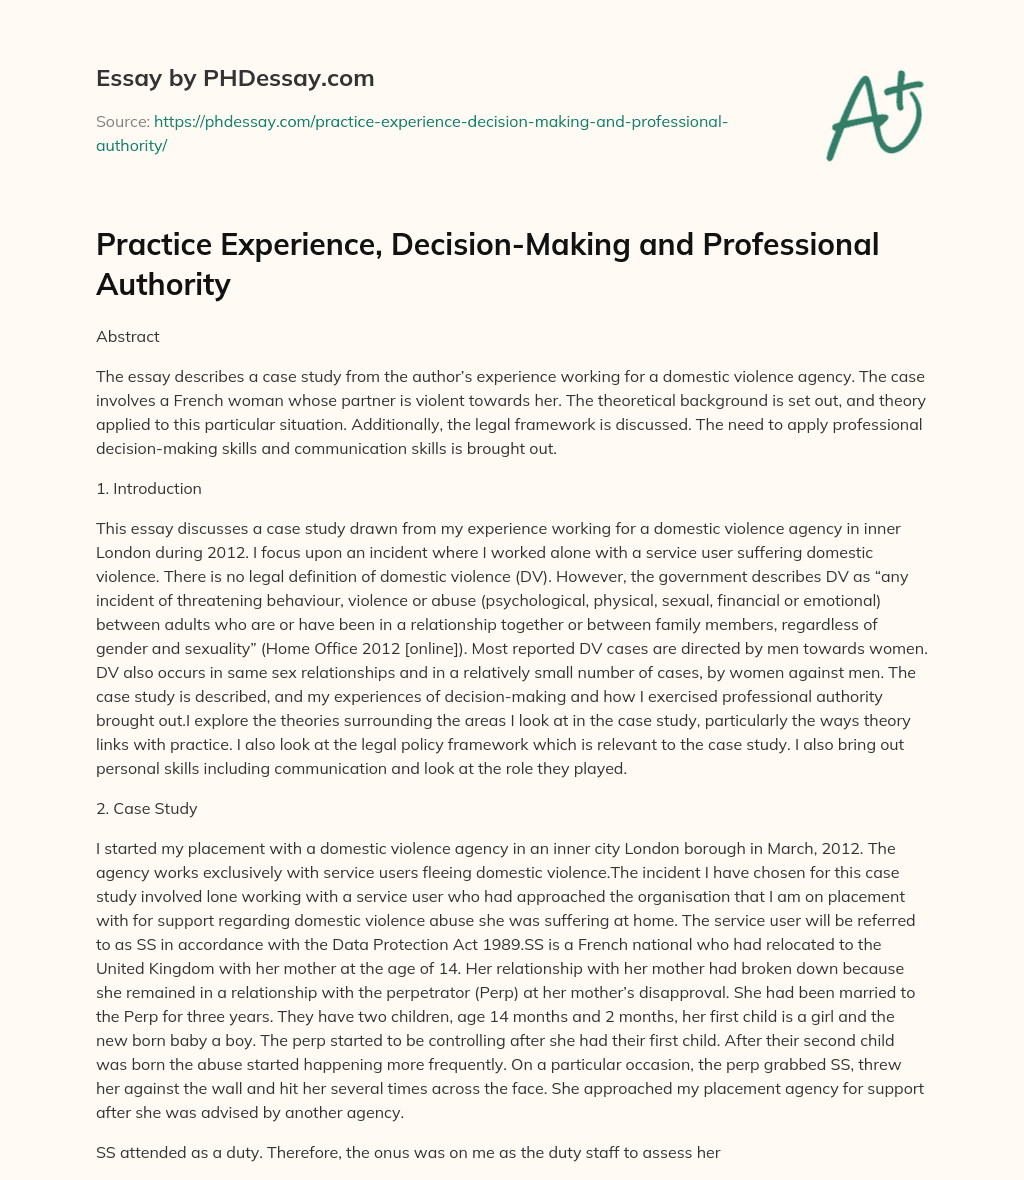 Practice Experience, Decision-Making and Professional Authority essay